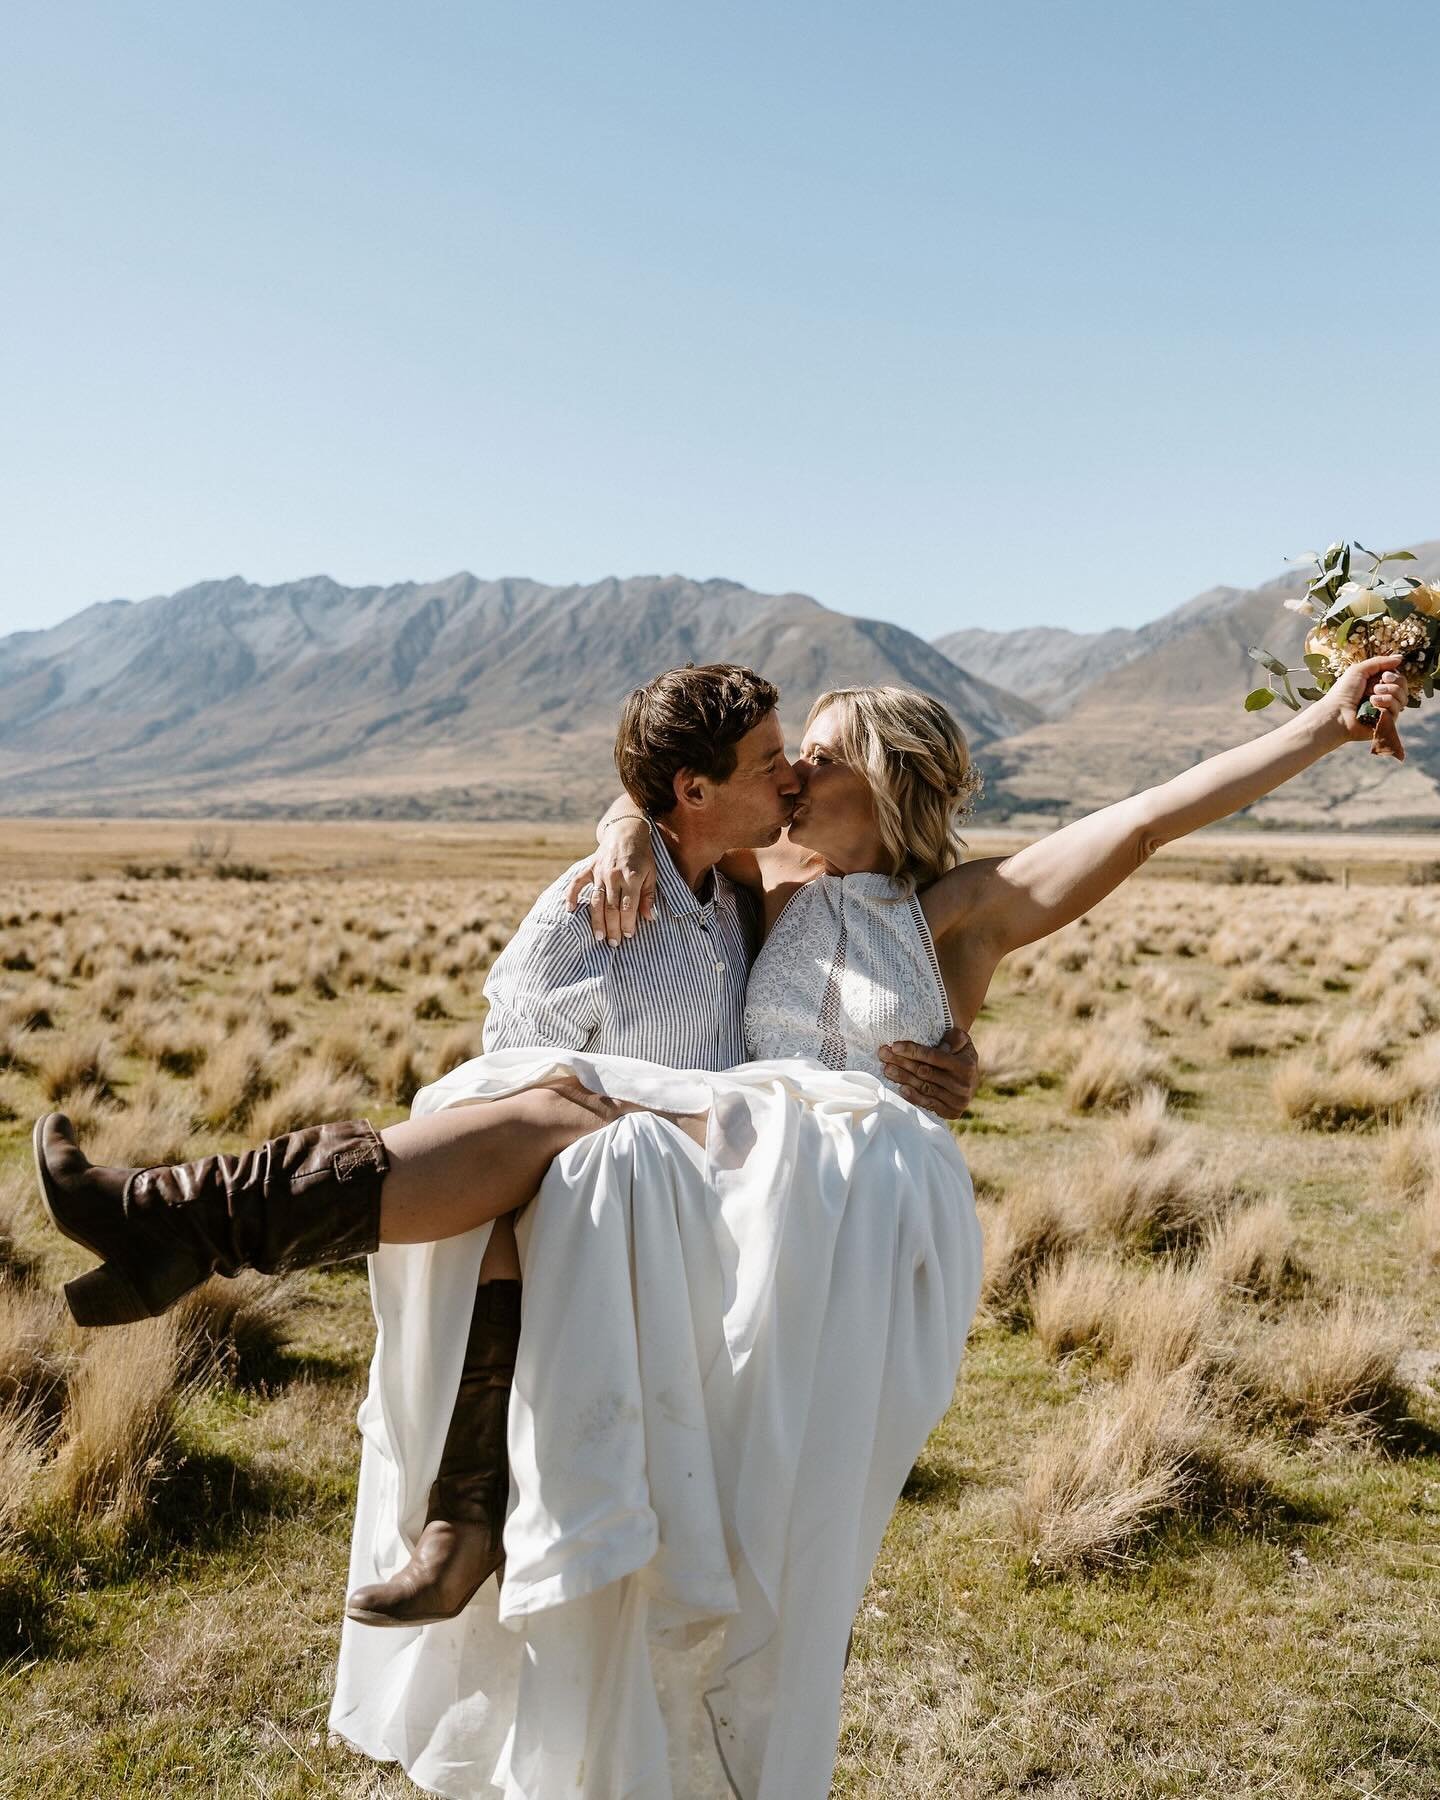 Bie &amp; Steve spontaneously decided to elope at the Temple Cabins in Ohau, with only a few weeks to plan everything. Their day was relaxed and fun, with their two adorable kids and closest friends as witnesses at this beautiful cabin in the middle 